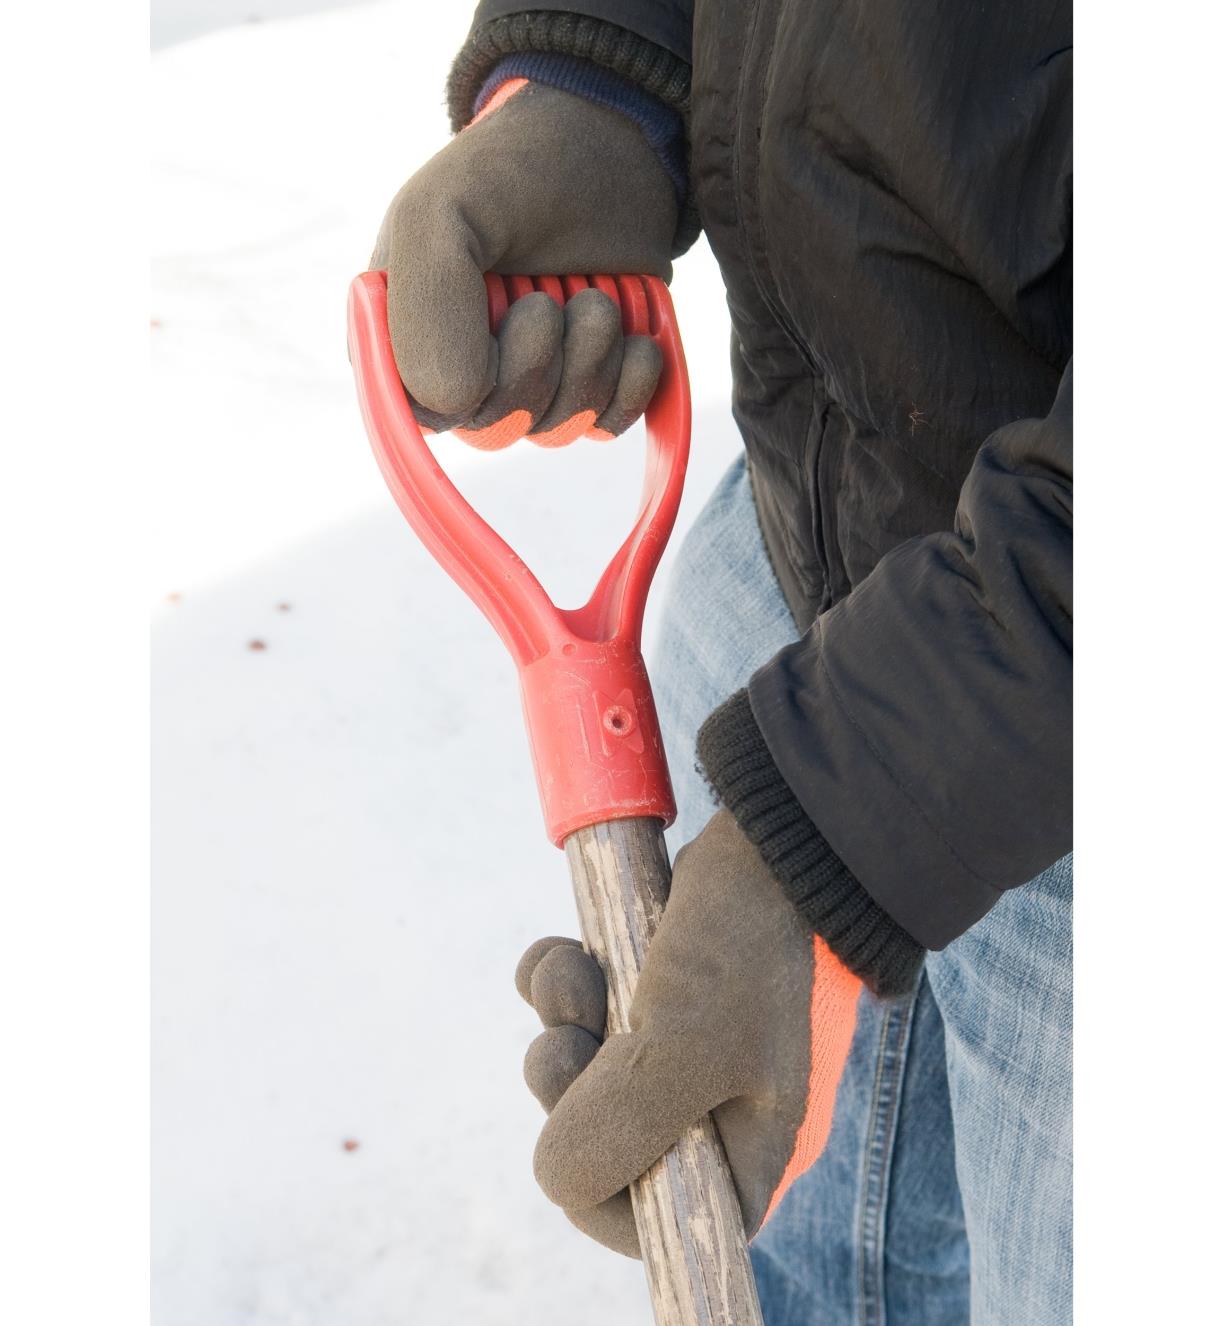 Wearing Thermal Gripper Gloves while shoveling